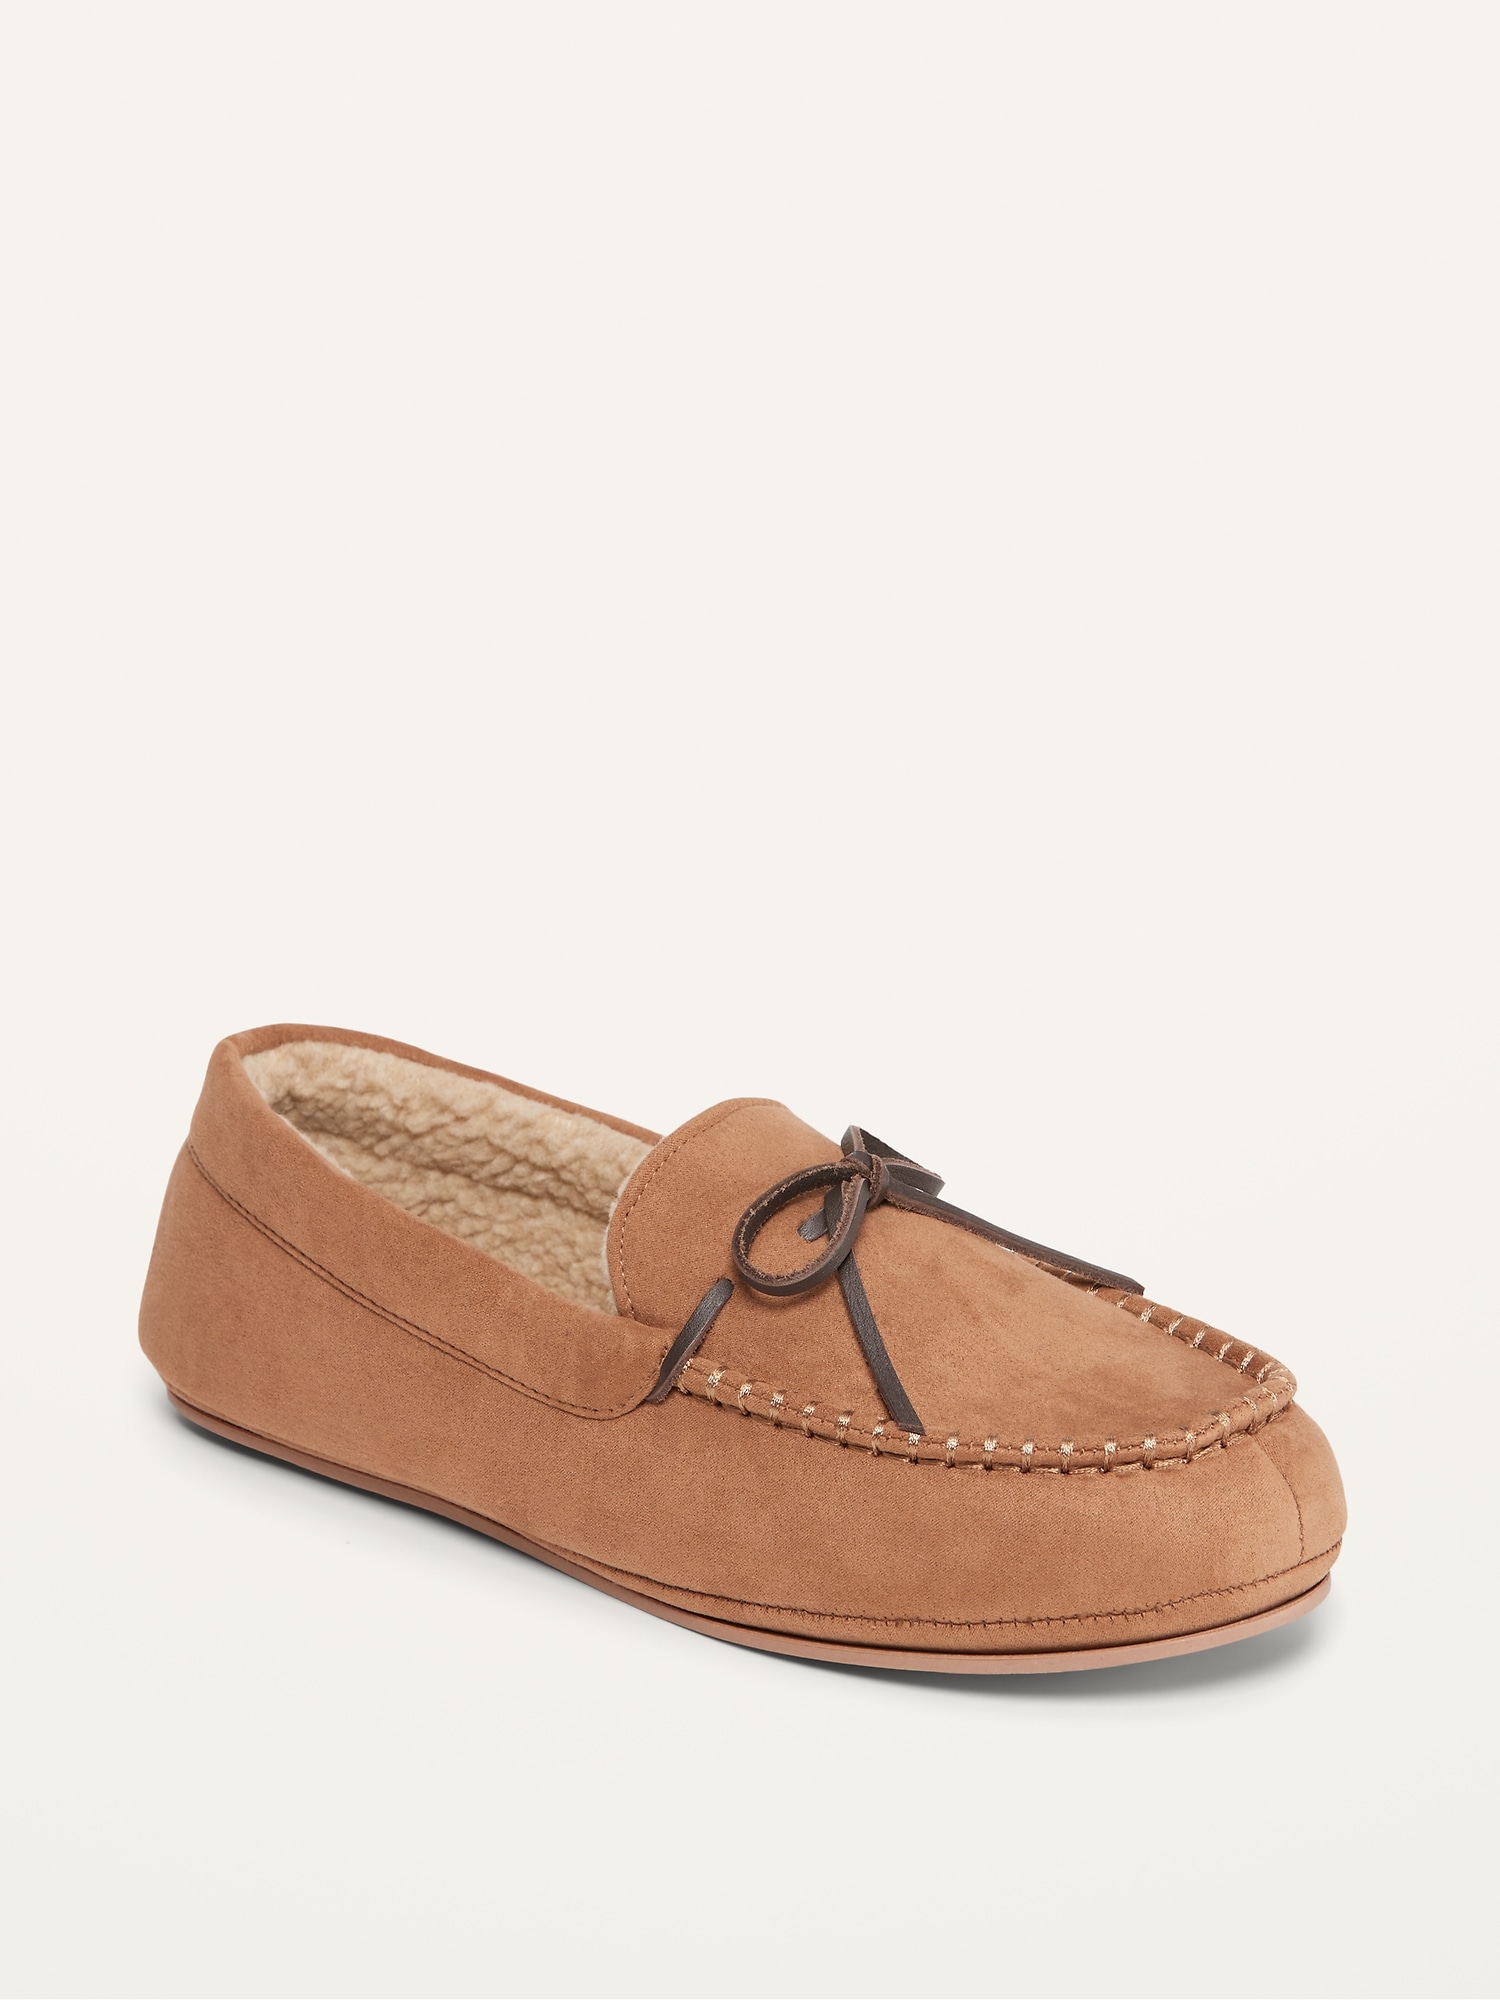 old navy moccasin slippers